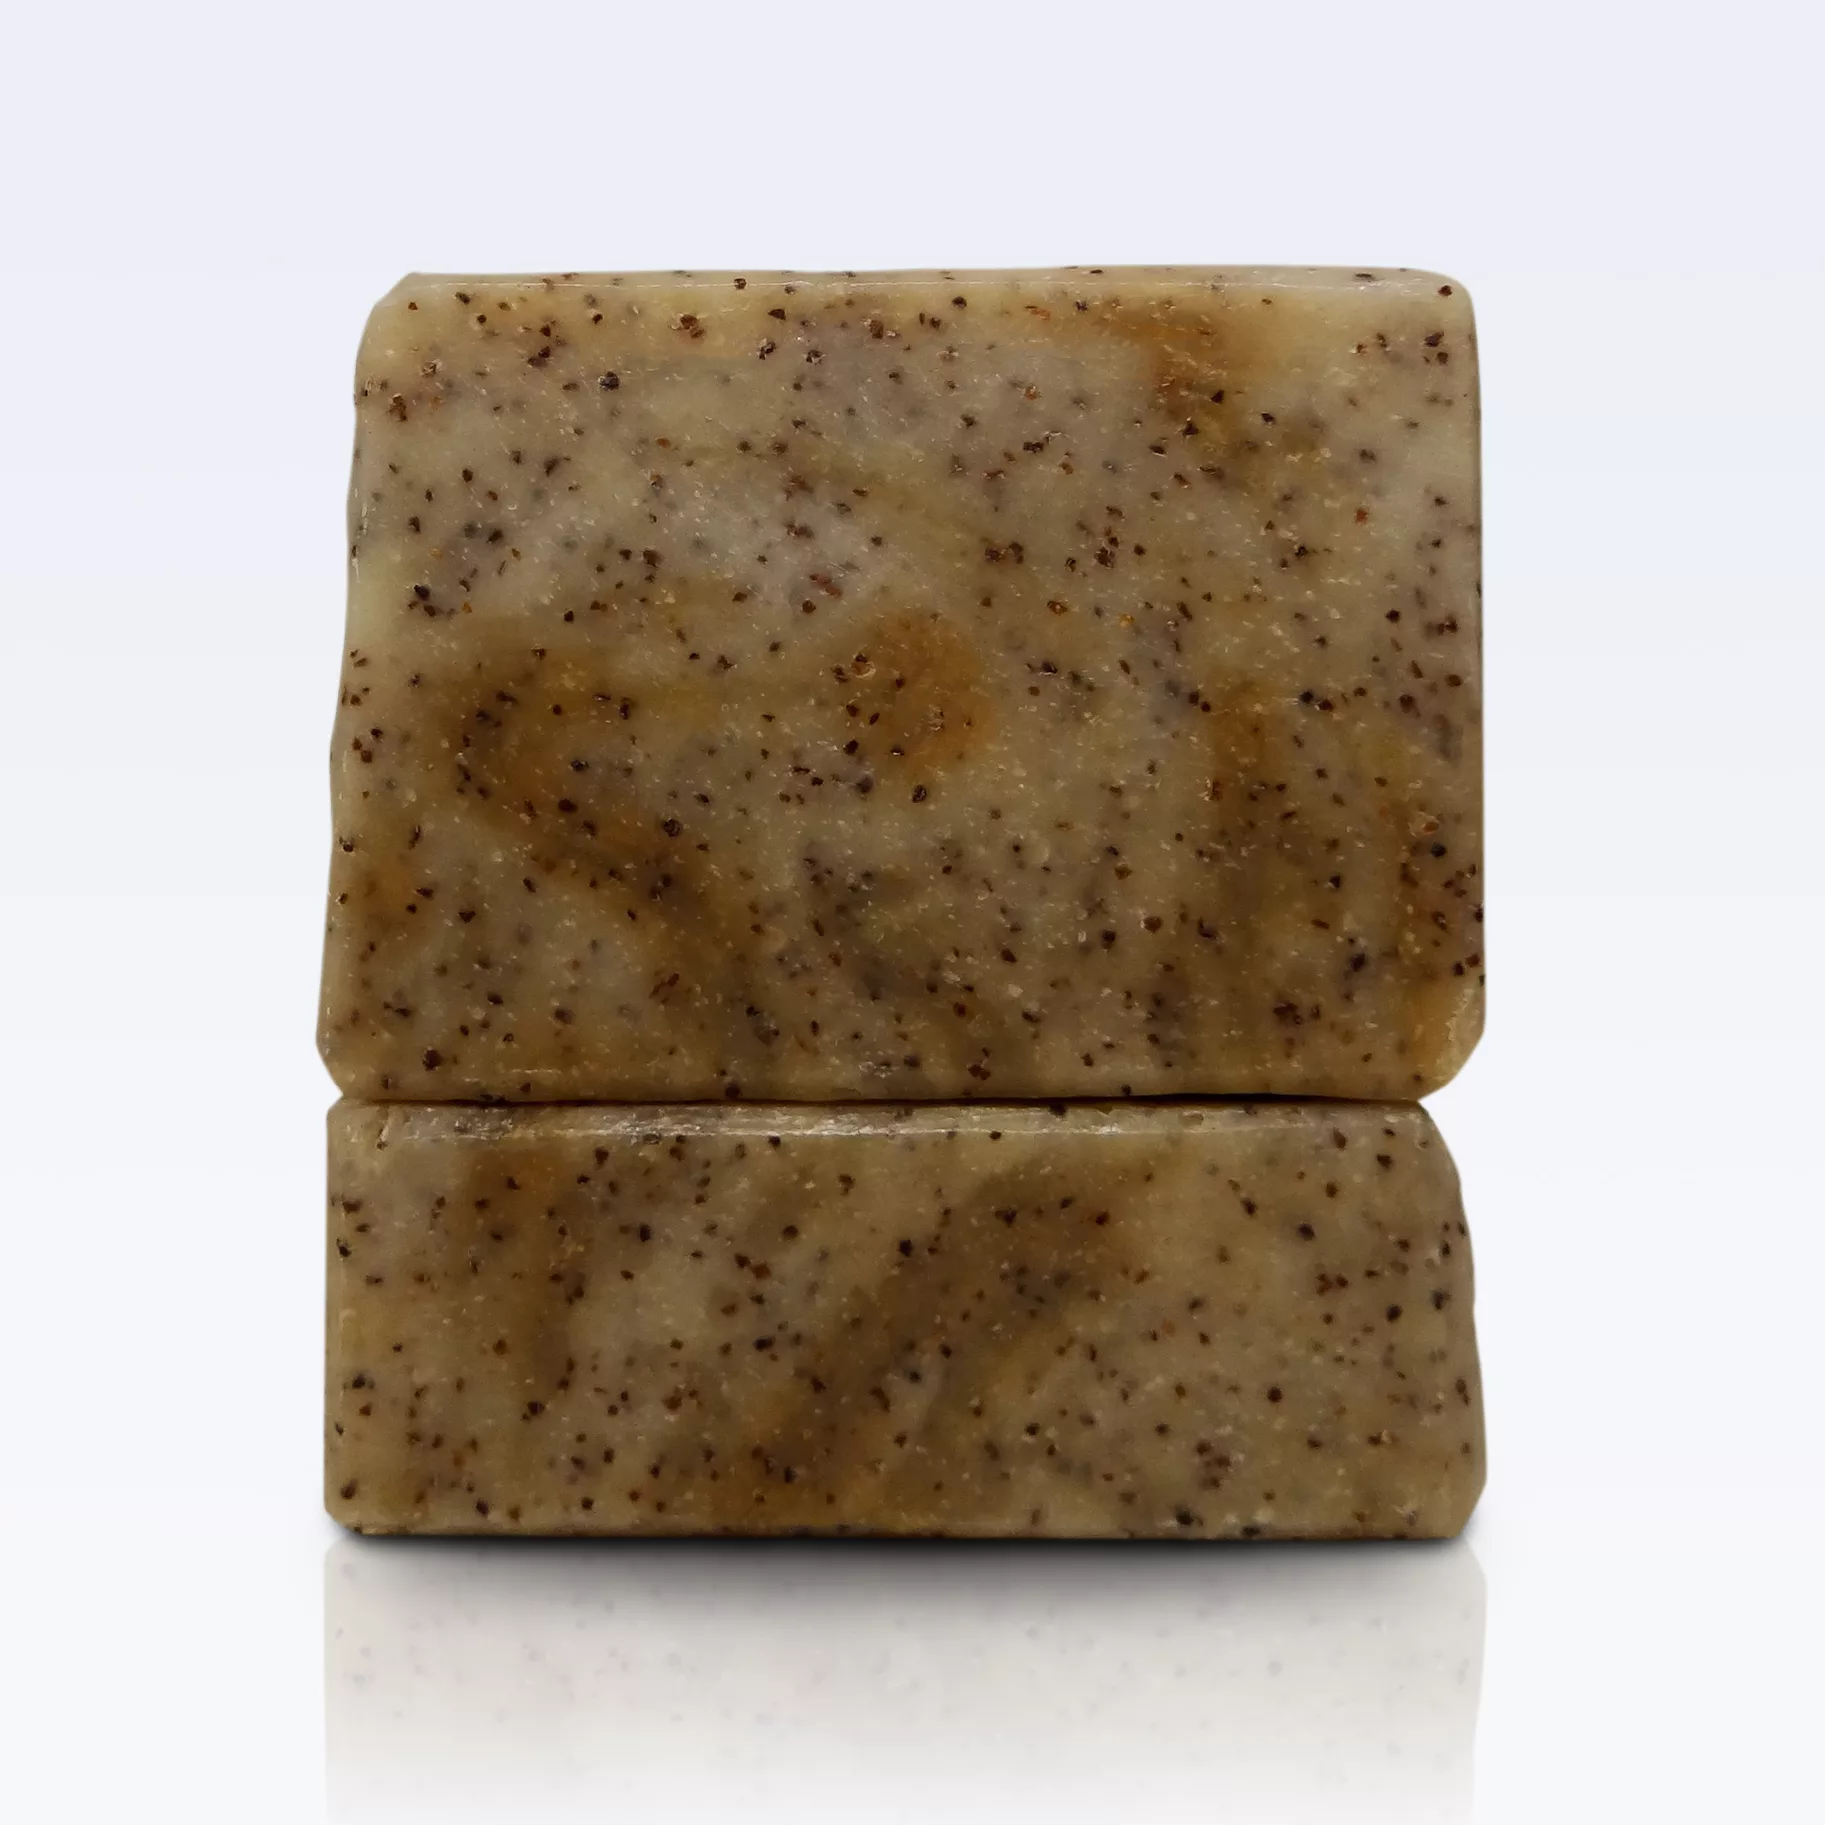 Scrub Bee handmade facial soap by Tubby Tabby Soaps (all natural, no added colour, unscented with honey and apricot seed)